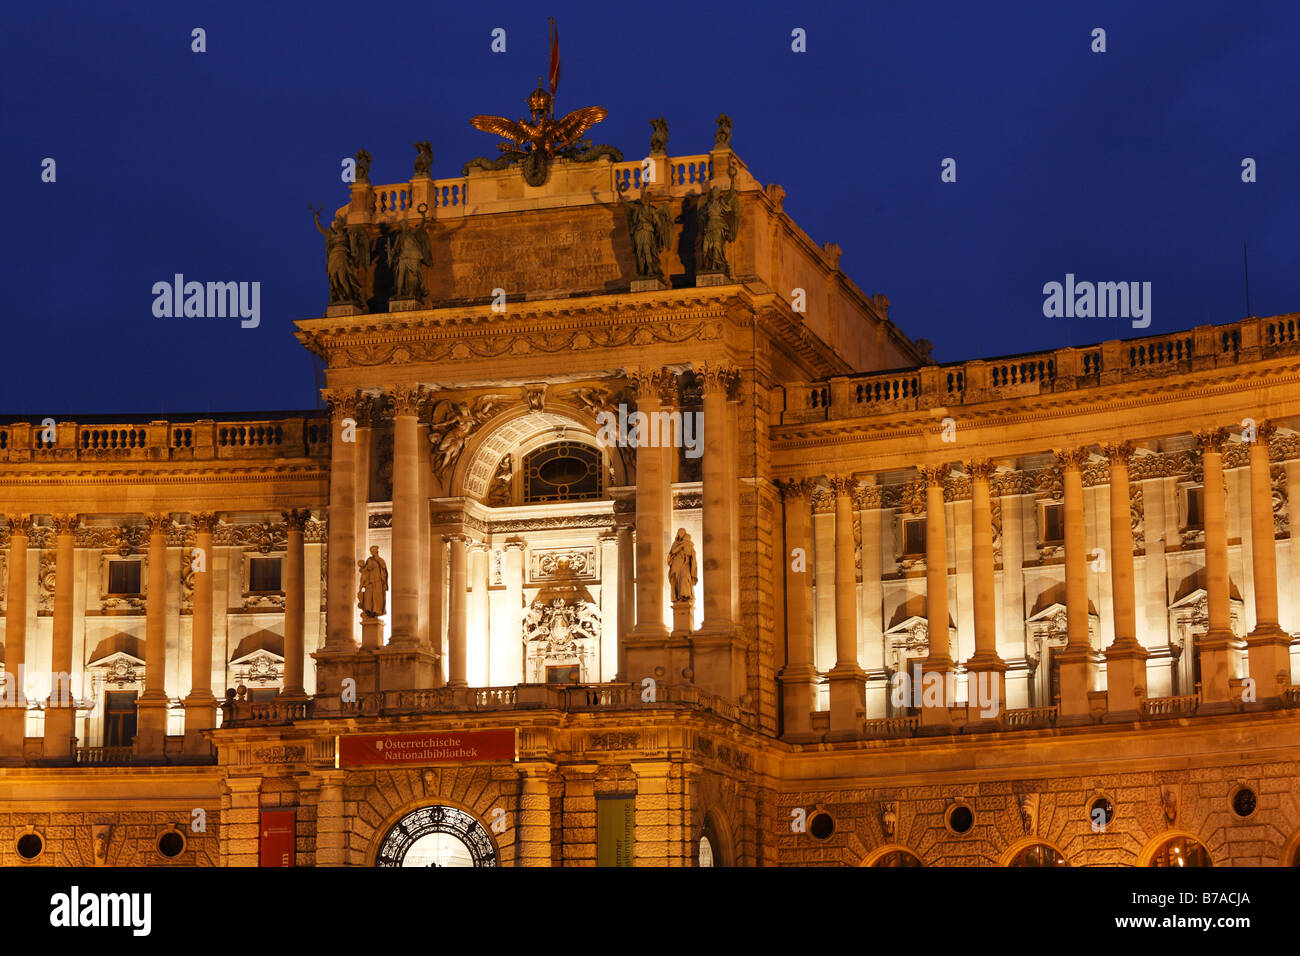 New Burg section, Hofburg Imperial Palace, Vienna, Austria, Europe Stock Photo